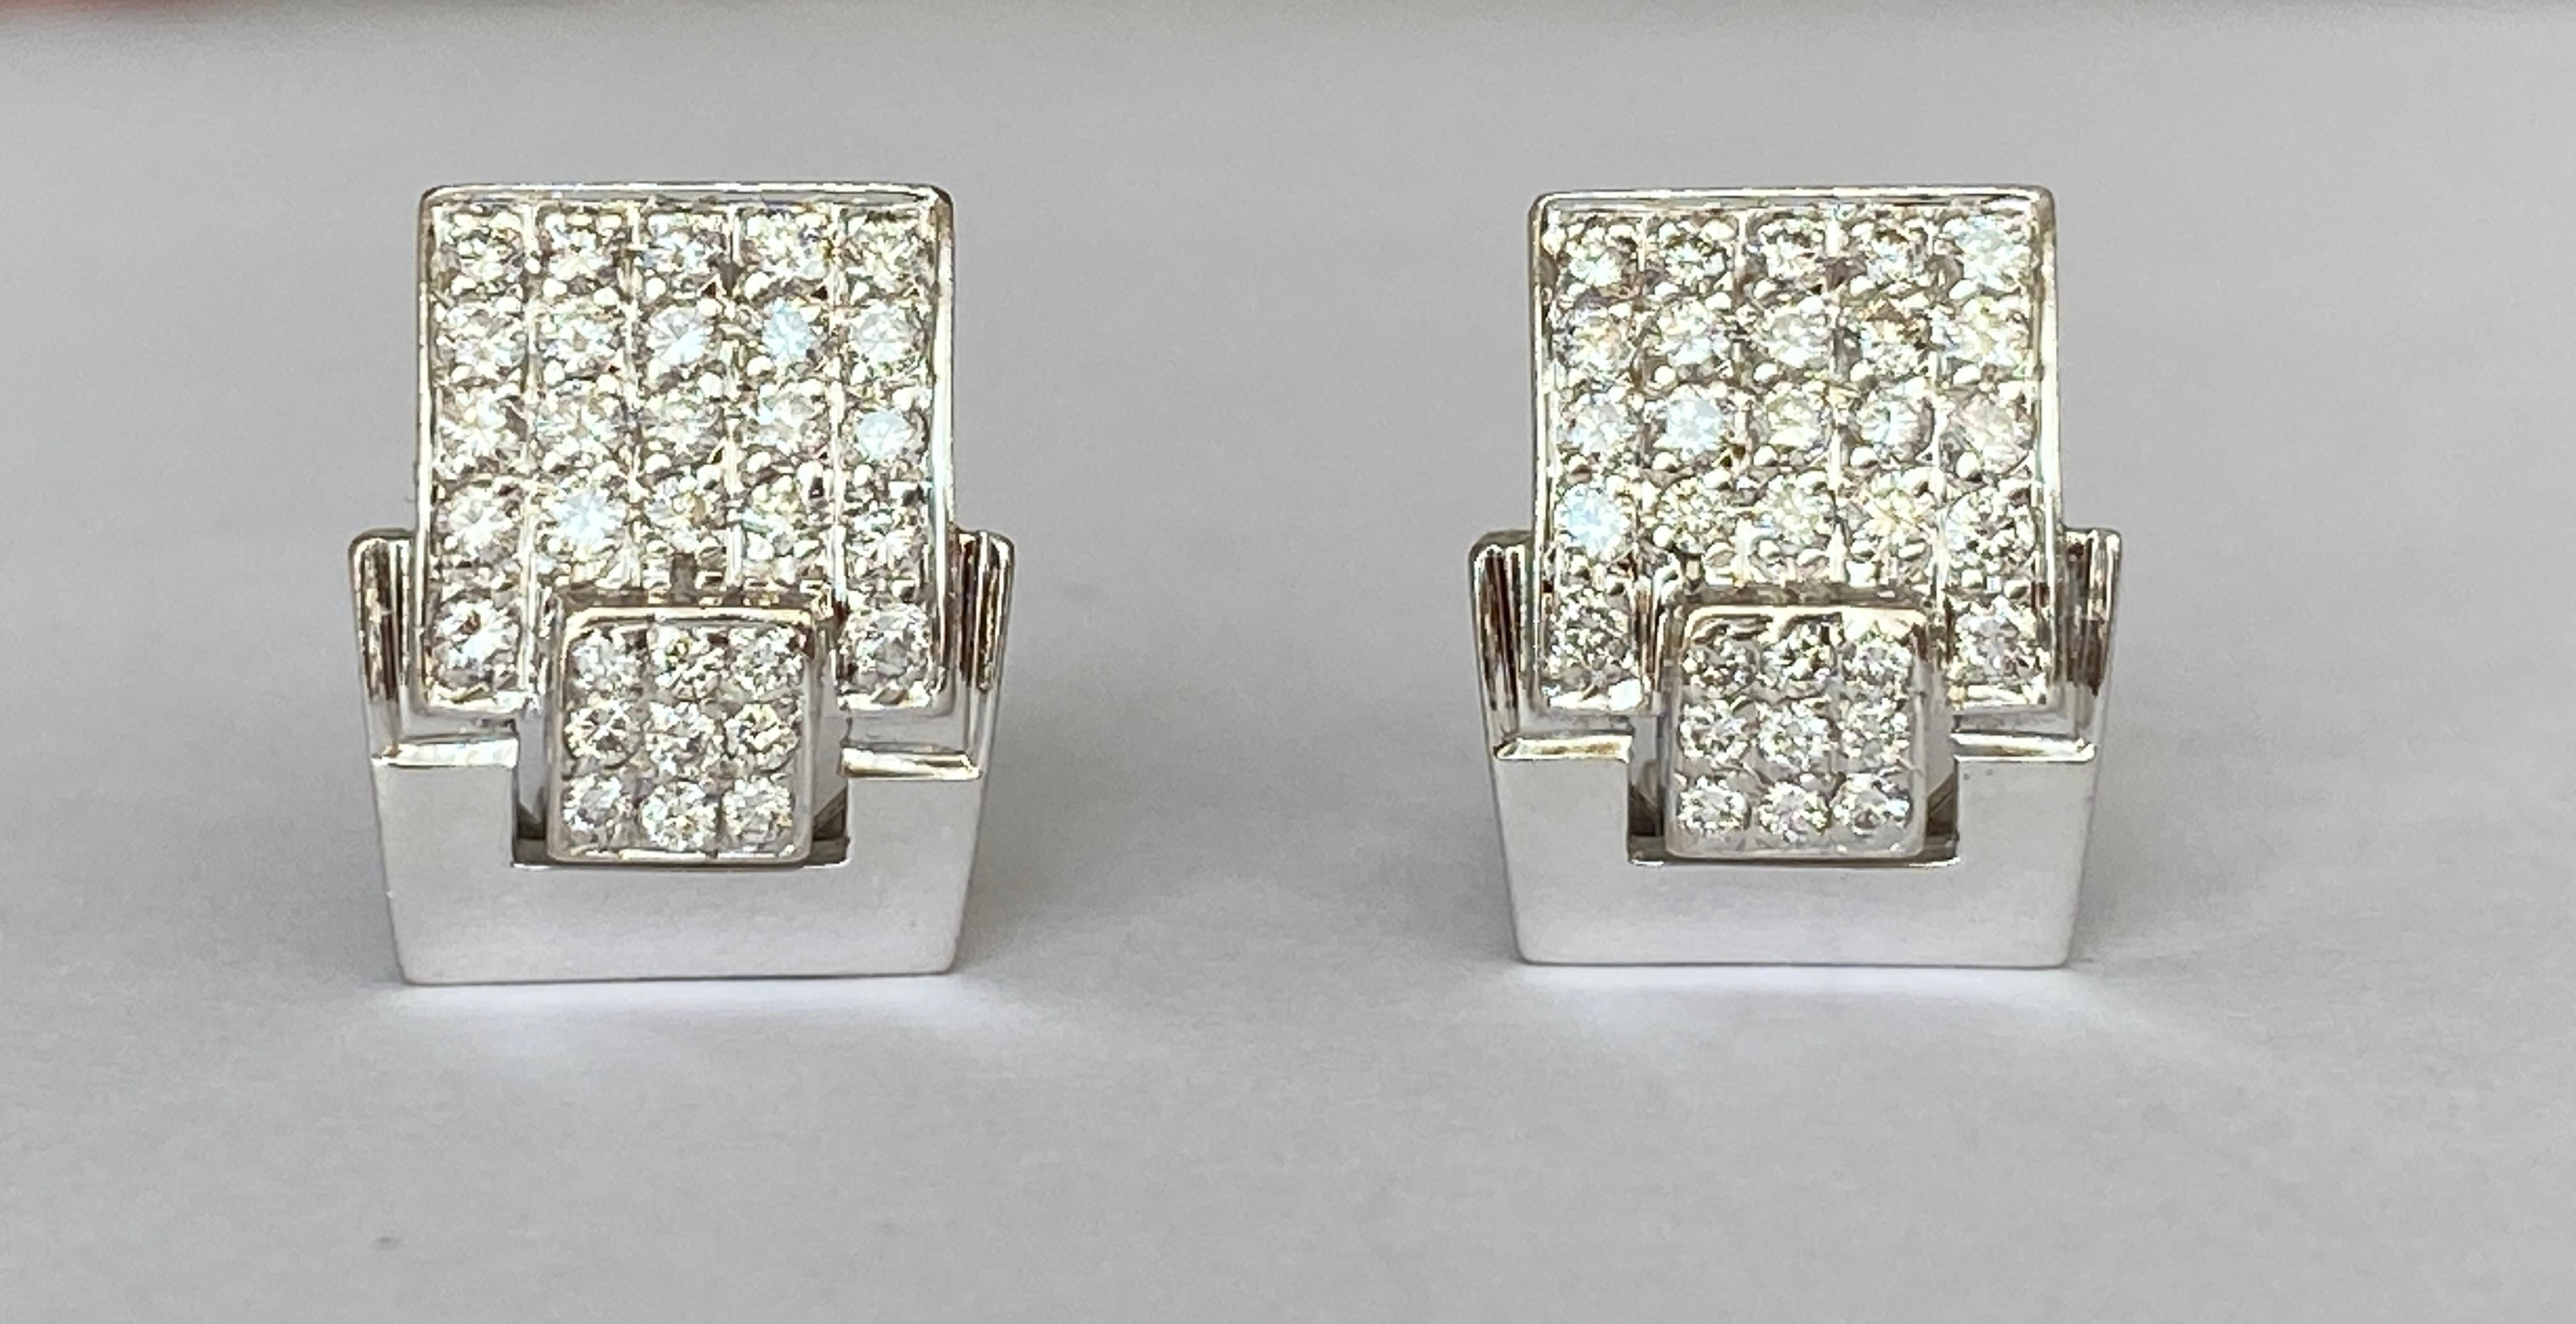 Offered in good condition, design 18 kt ear studs on the front set with 62 brilliant cut diamonds of 1.18 ct of quality G/VS/SI. 
Gold content: 18 kt (hallmarked)  
18 brilliant cut diamonds: 0.30 ct G/VS/SI  
44 brilliant cut diamonds: 0.88 ct